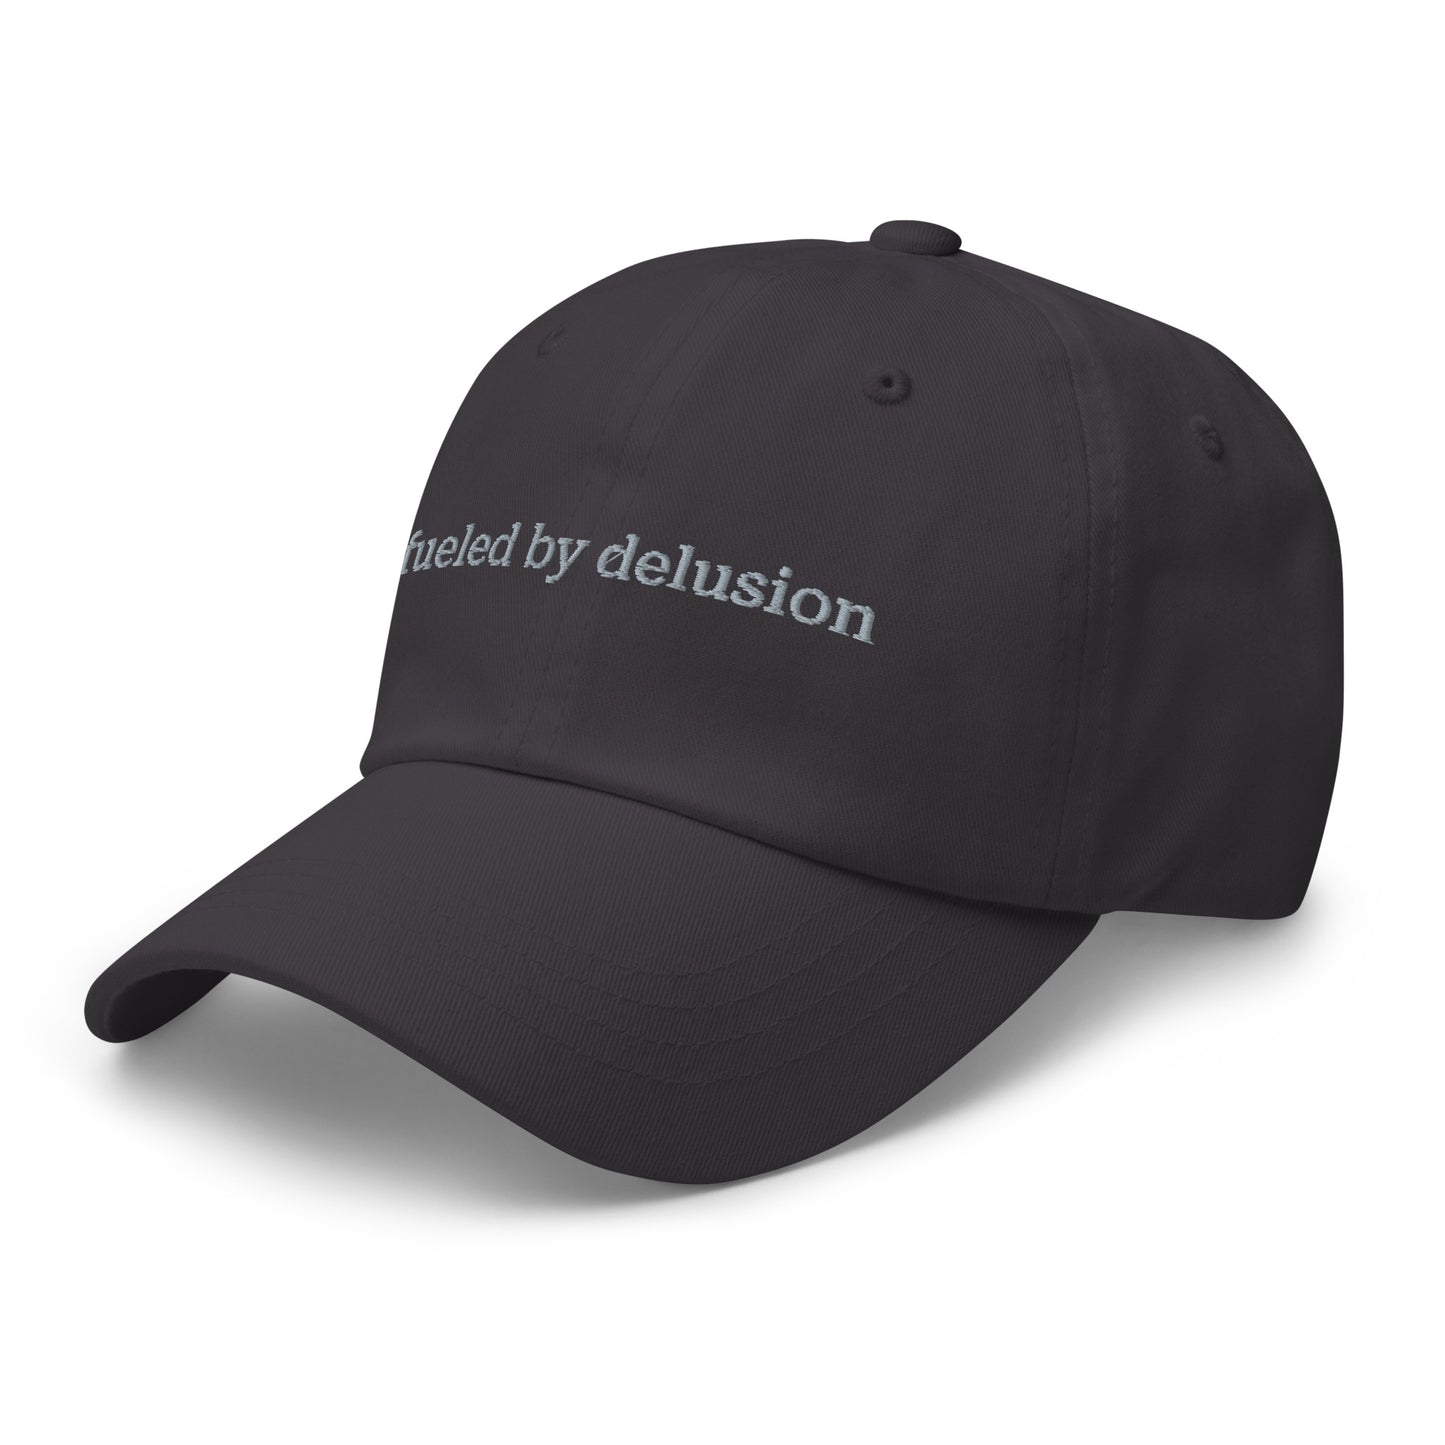 fueled by delusion dad hat